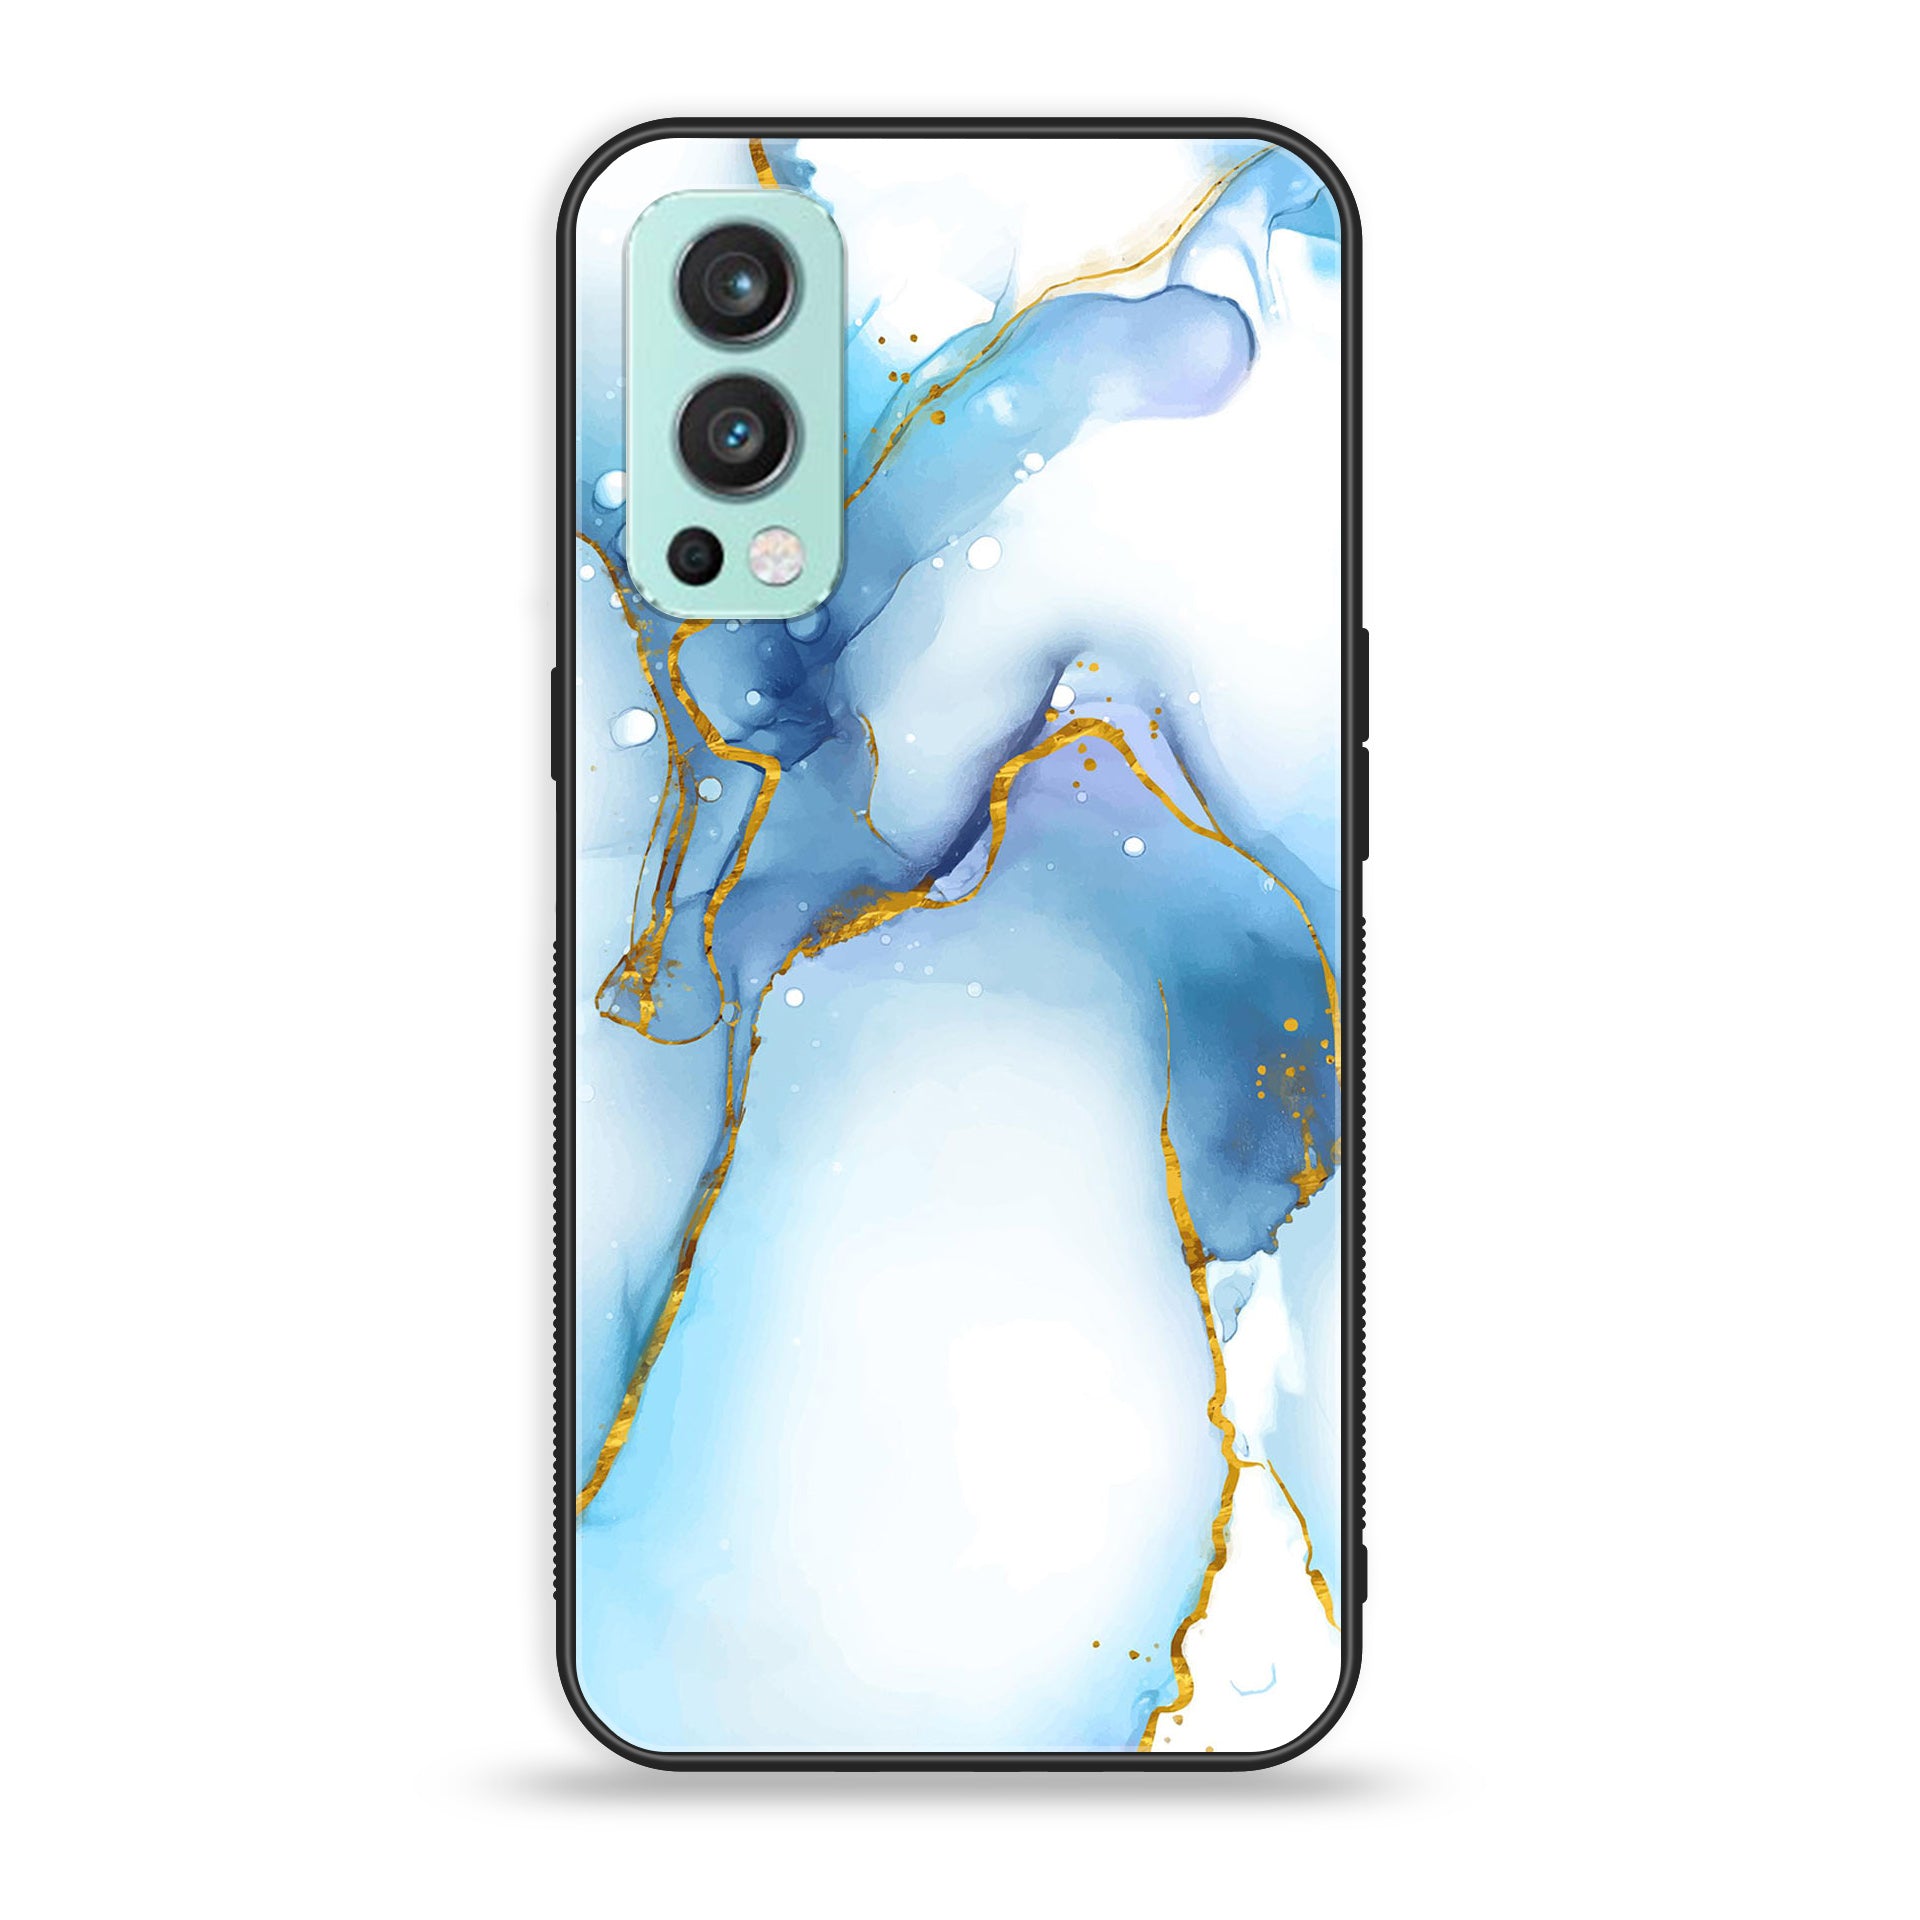 OnePlus Nord 2 5G - Blue Marble Series V 2.0 - Premium Printed Glass soft Bumper shock Proof Case